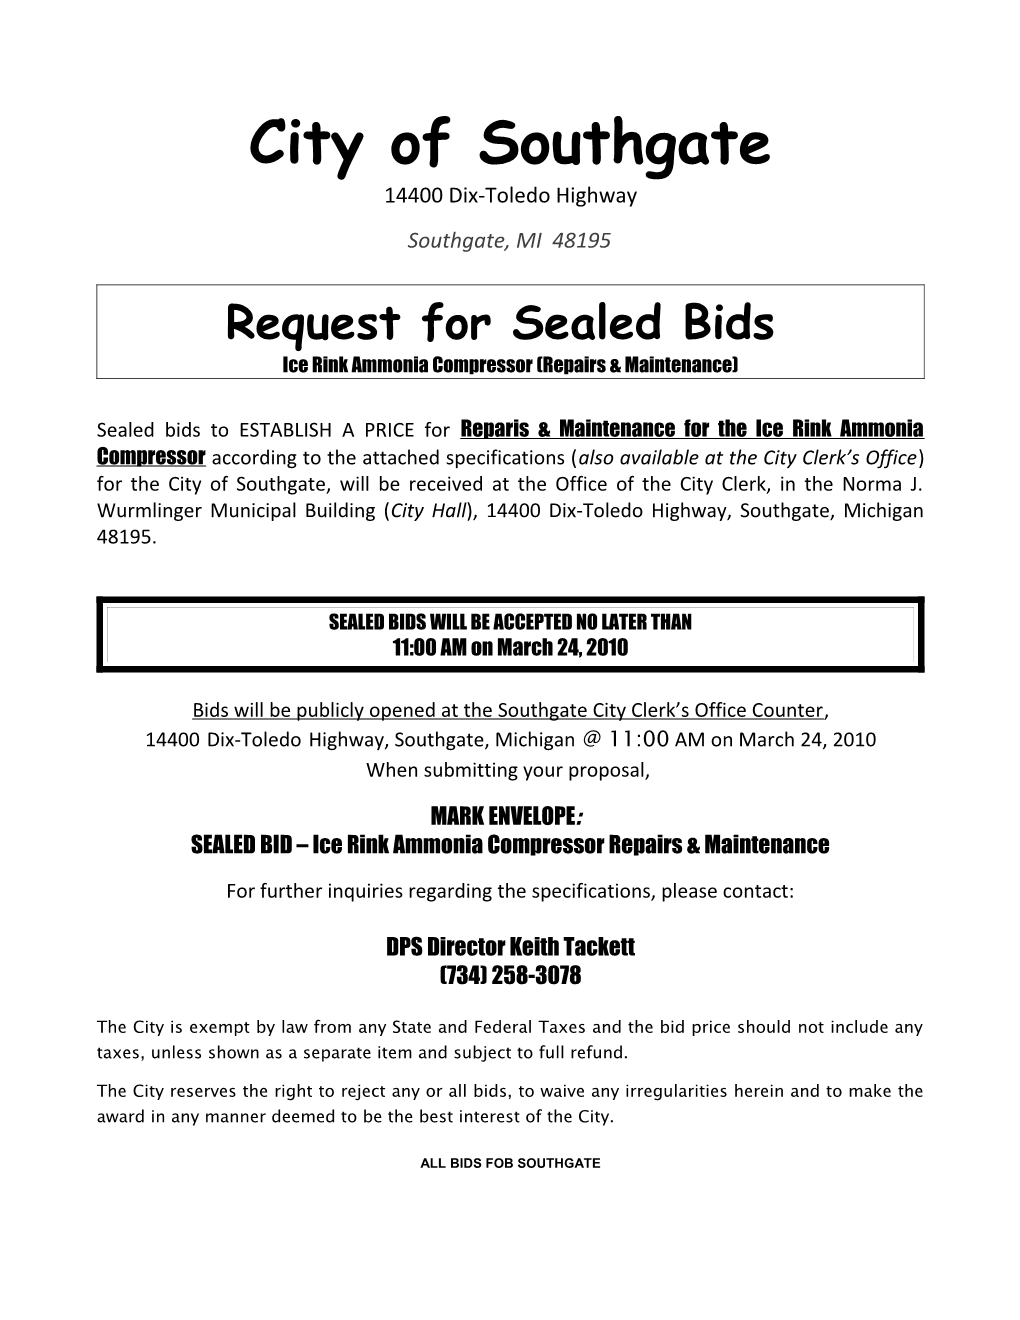 Request for Sealed Bids